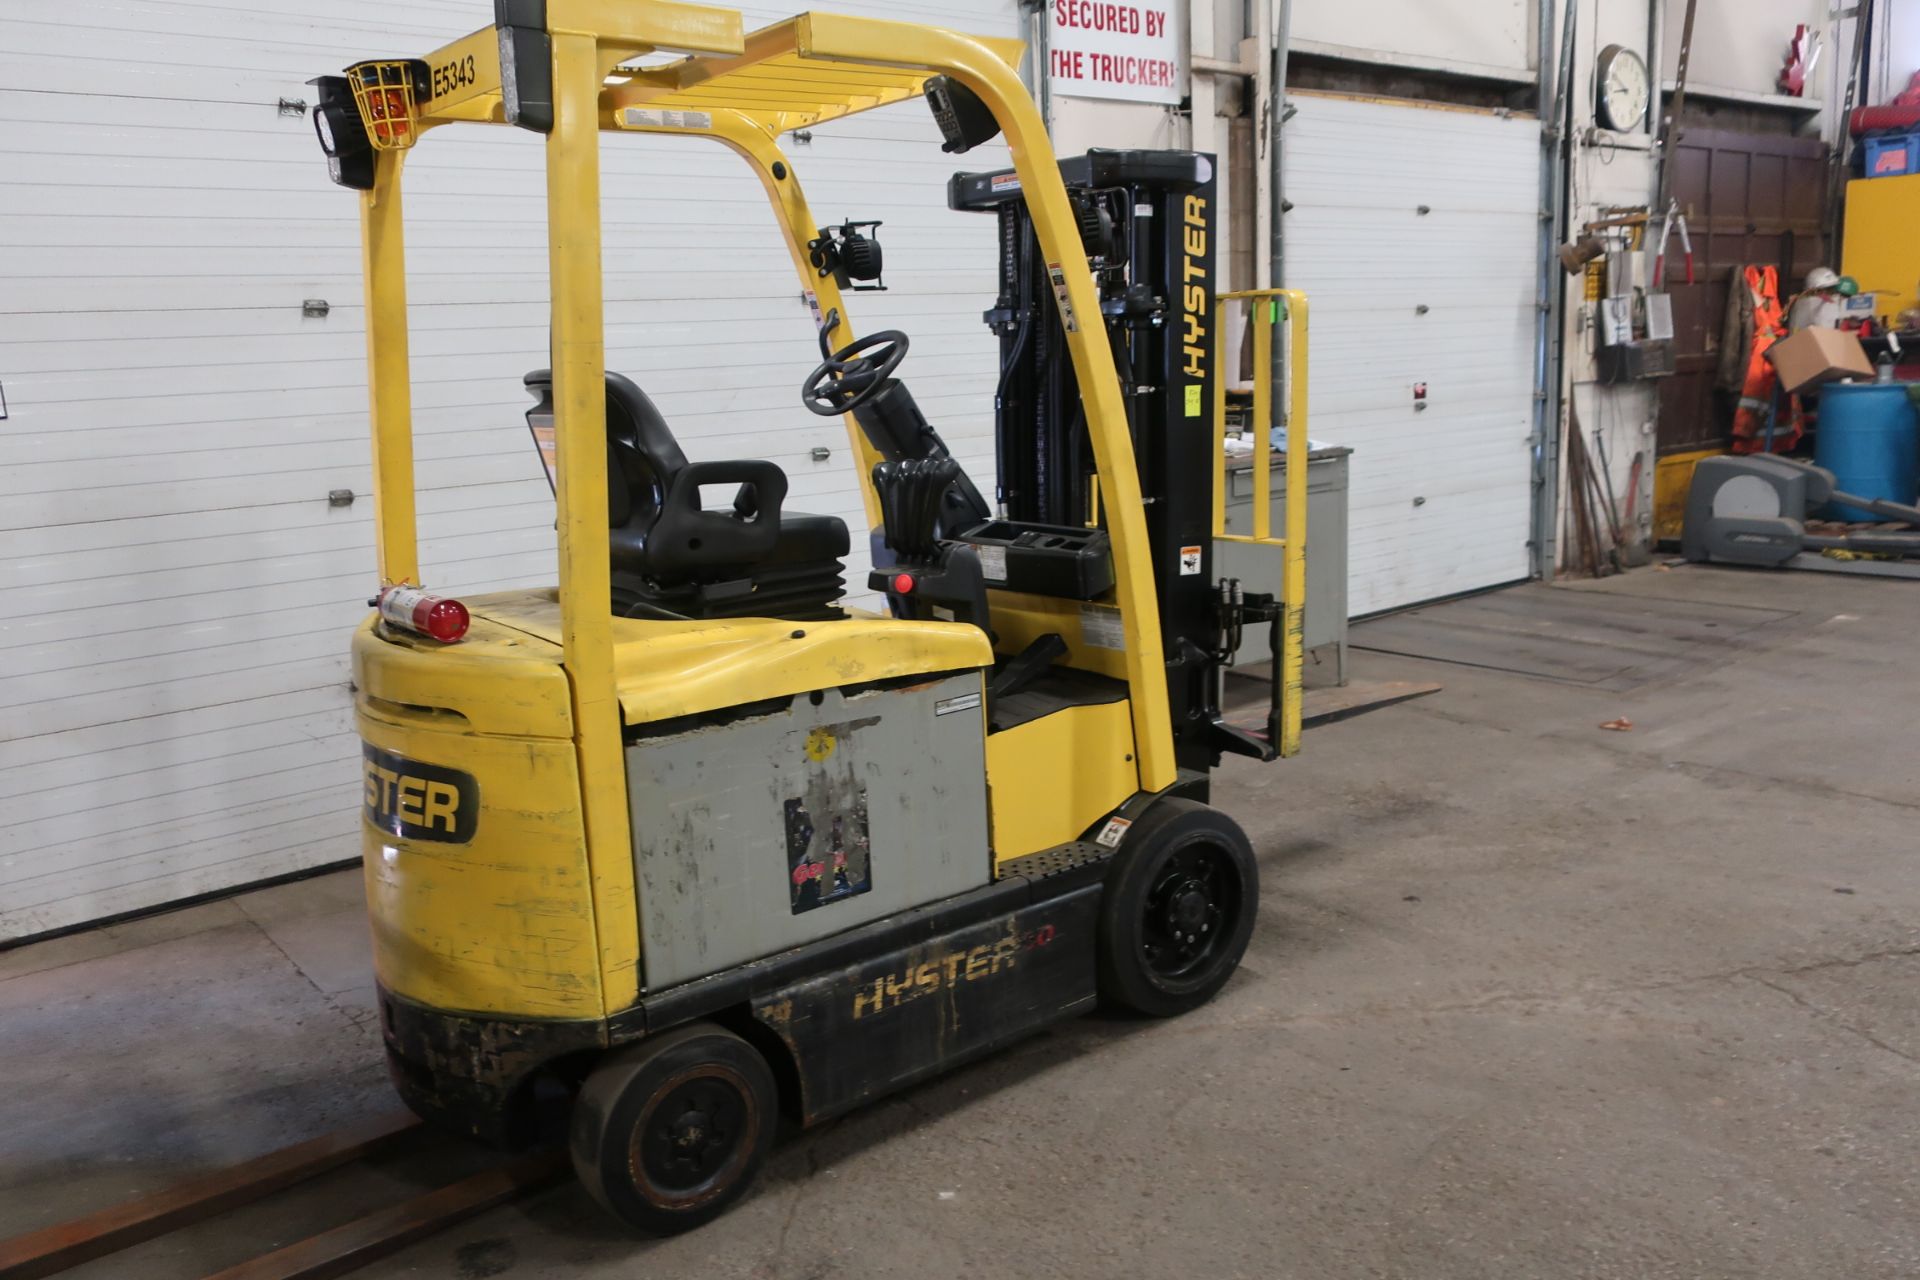 FREE CUSTOMS - 2011 Hyster 5000lbs Capacity Forklift with 3-stage mast - electric with charger